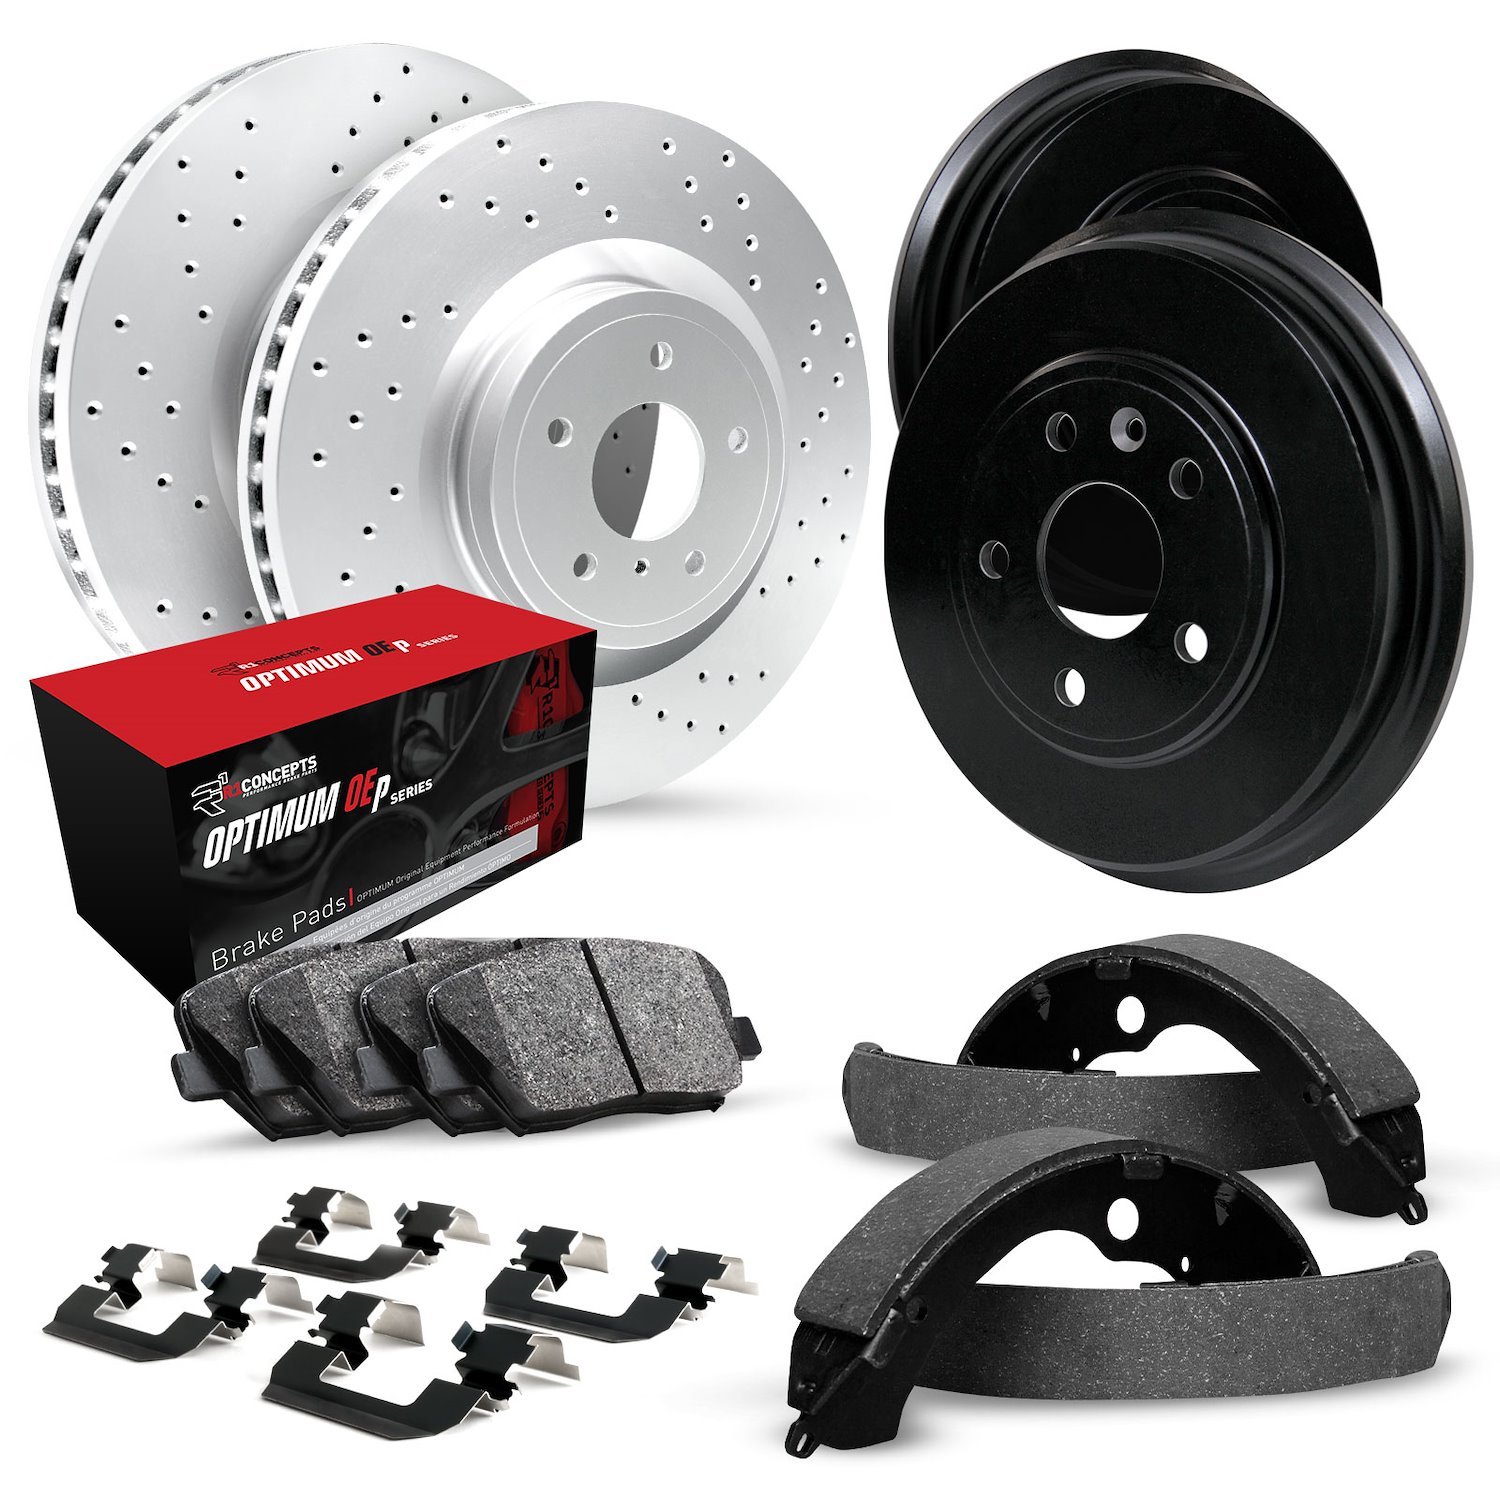 GEO-Carbon Drilled Brake Rotor & Drum Set w/Optimum OE Pads, Shoes, & Hardware, 1991-2002 GM, Position: Front & Rear